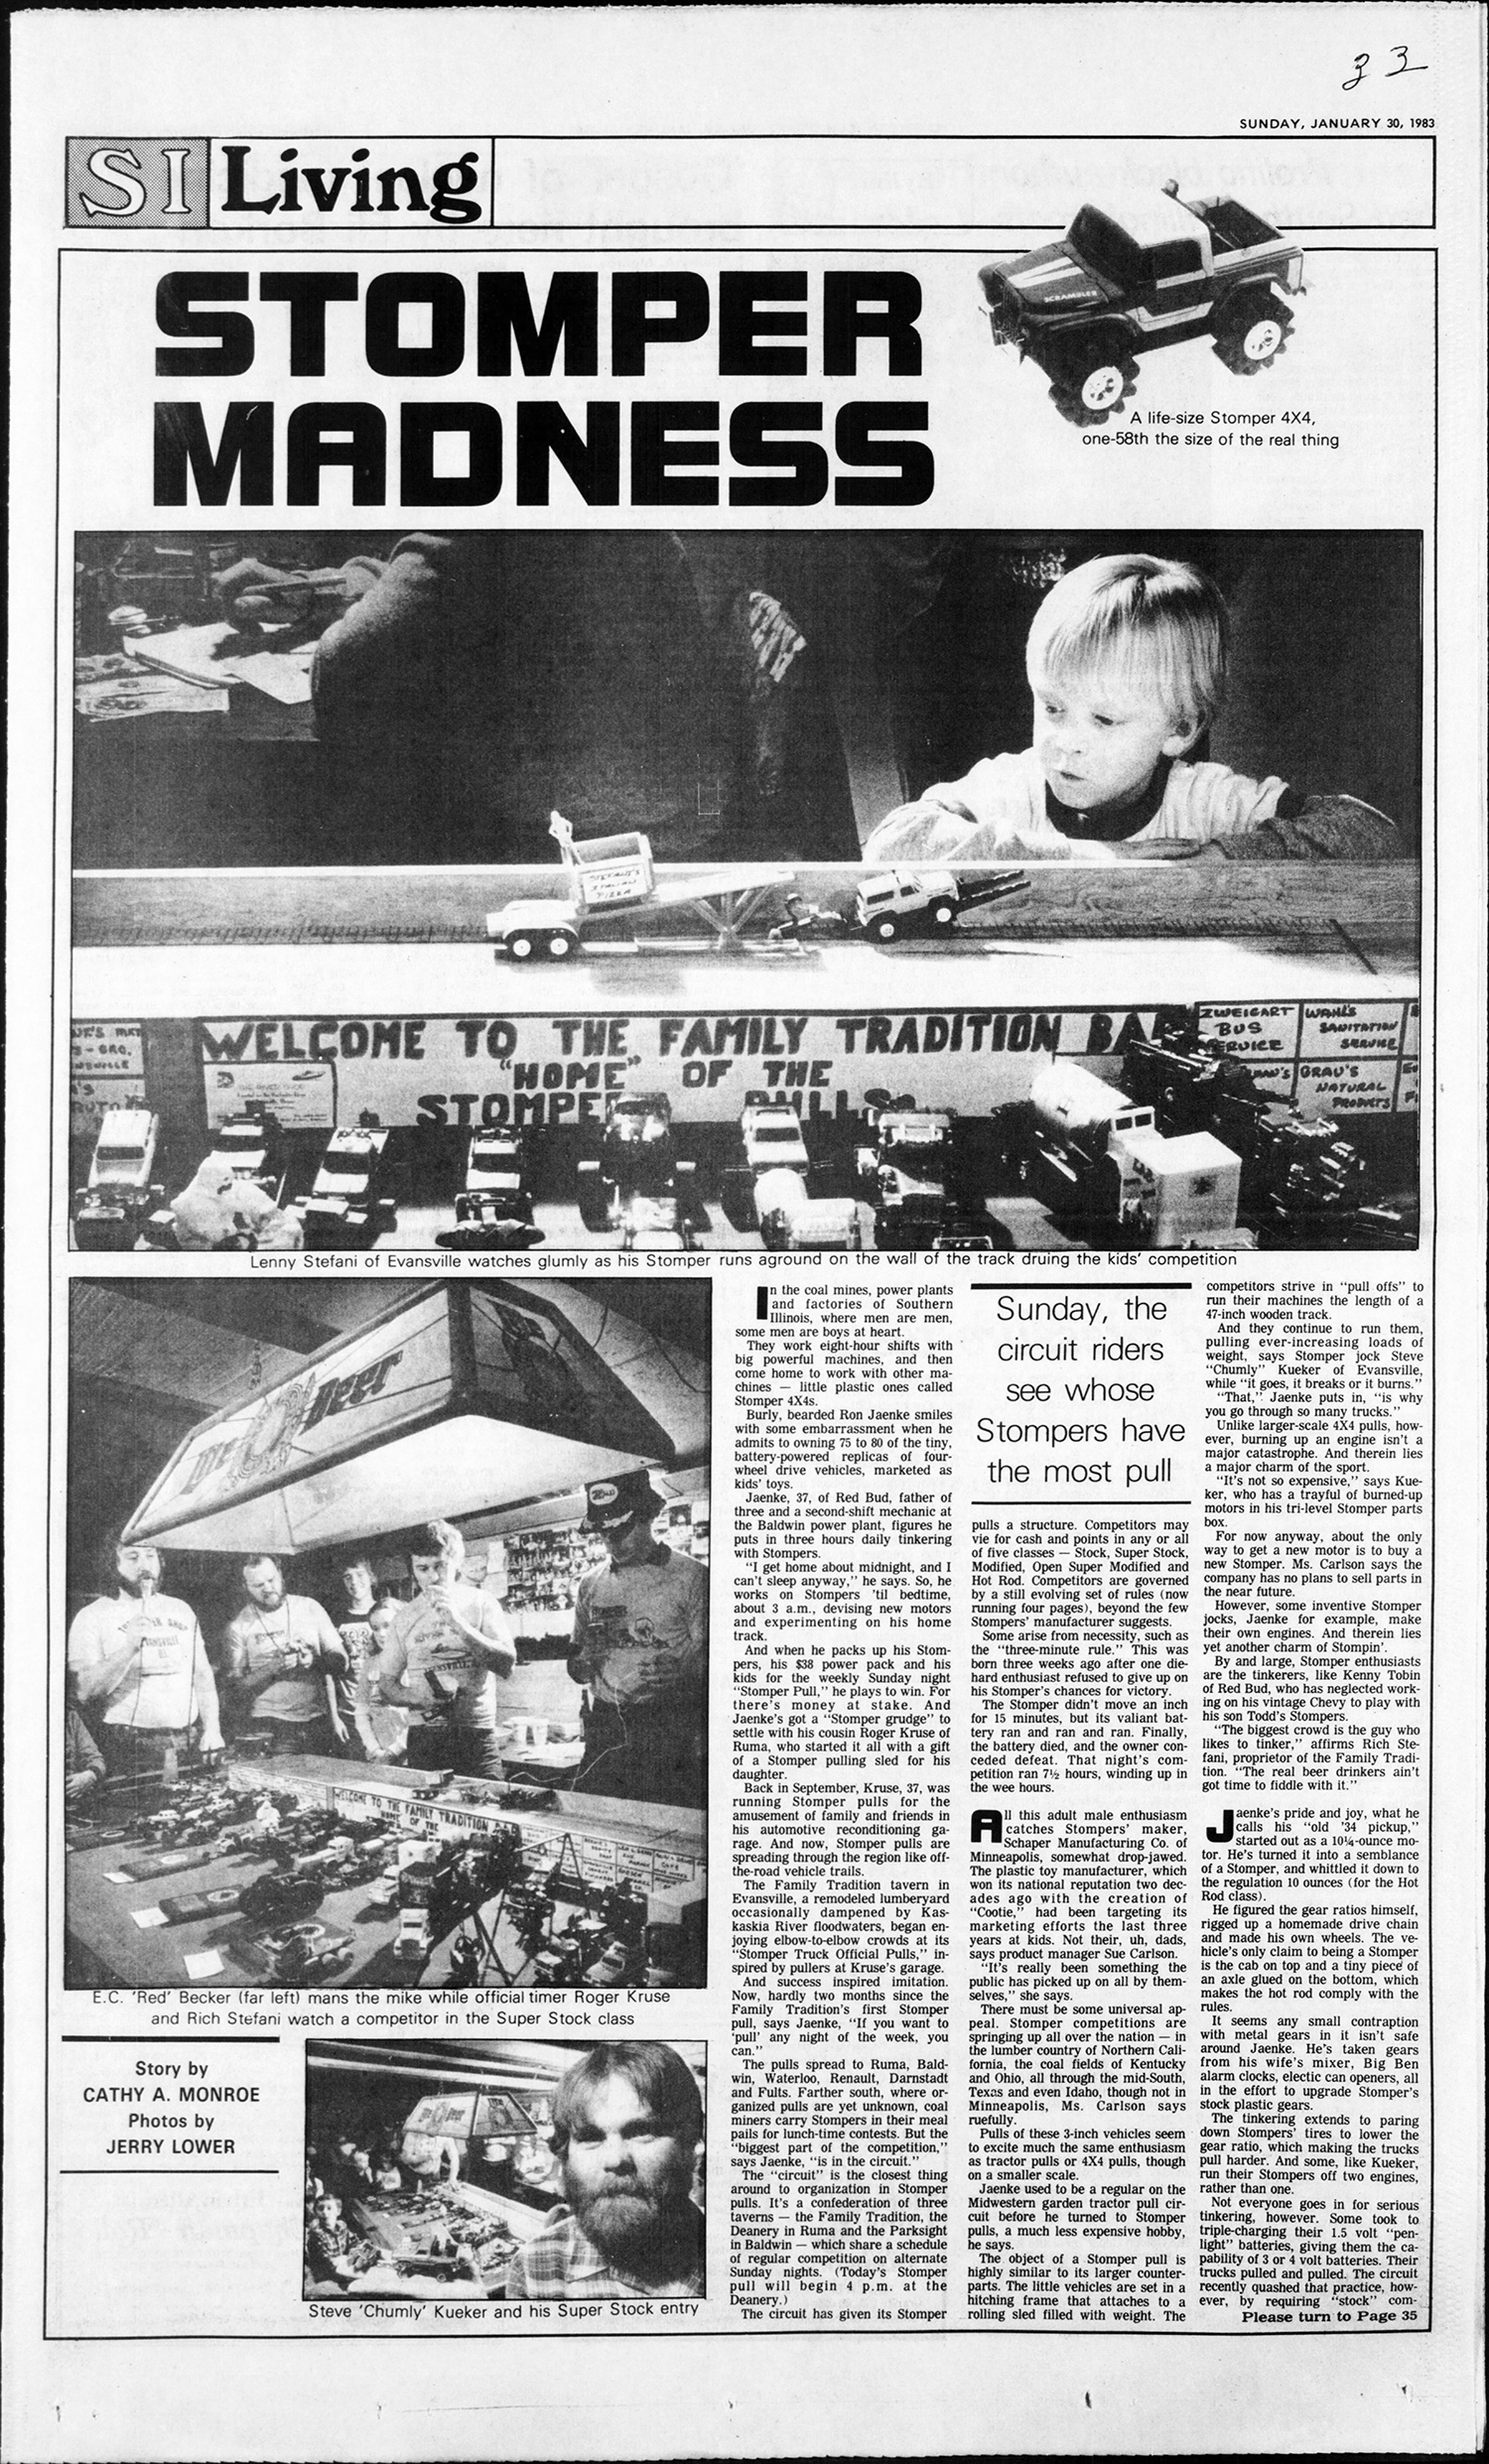 The front page of the living section of the Southern Illinoisan newspaper shows several black and white photographs of children and adults playing with small motorized trucks called Stompers.